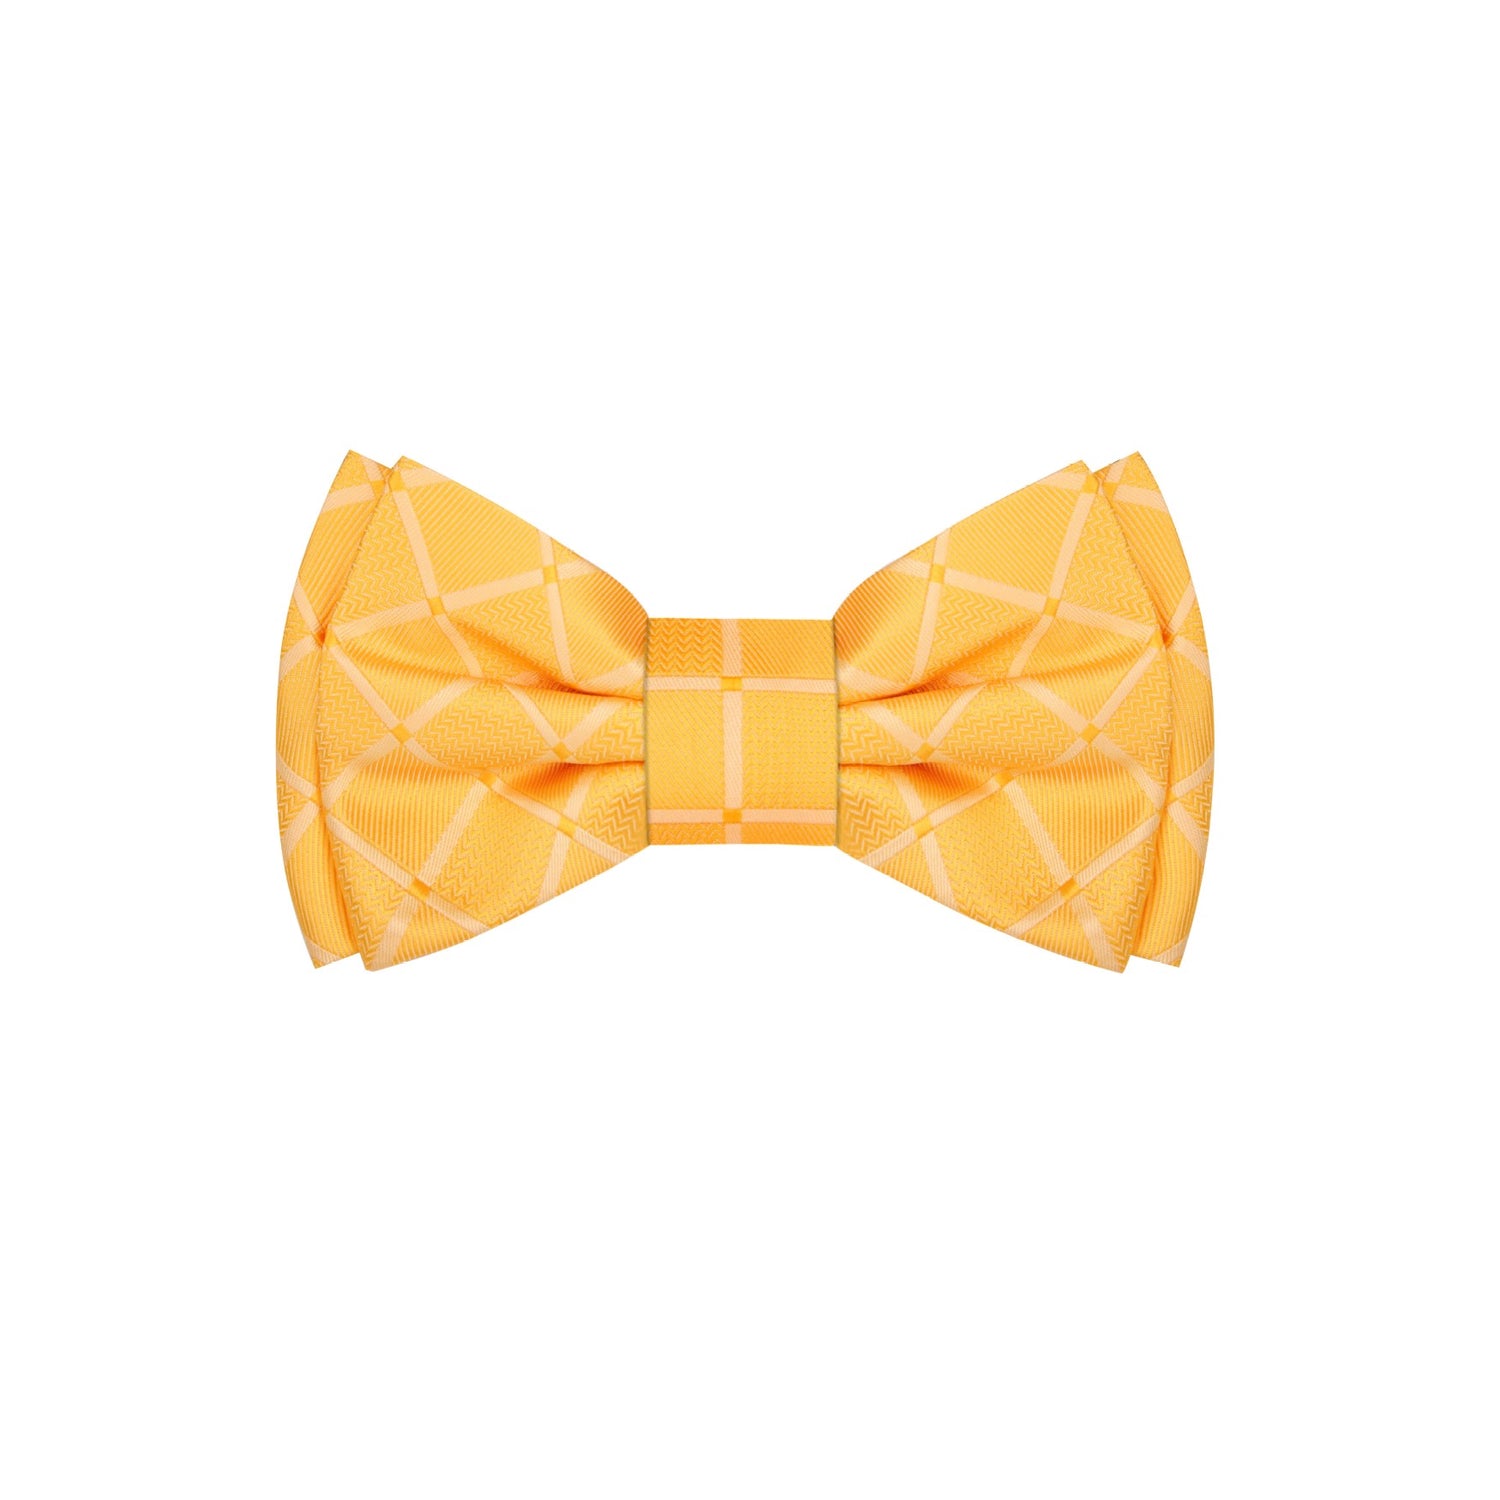 Solid Yellow with Geometric Texture Bow Tie